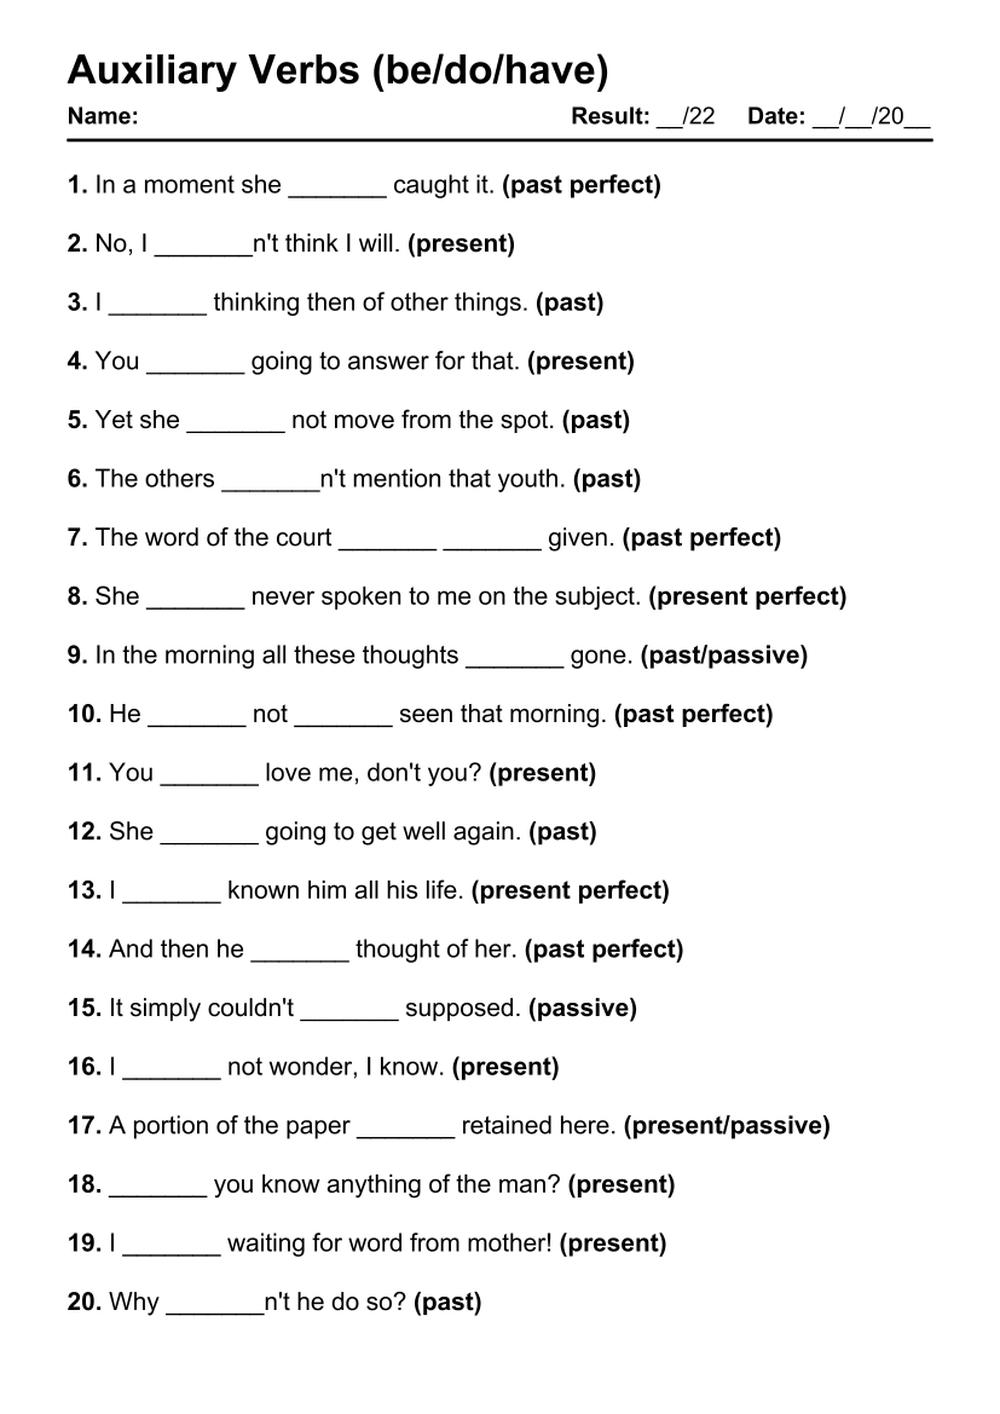 Printable Auxiliary Verbs Exercises - PDF Worksheet with Answers - Test 19